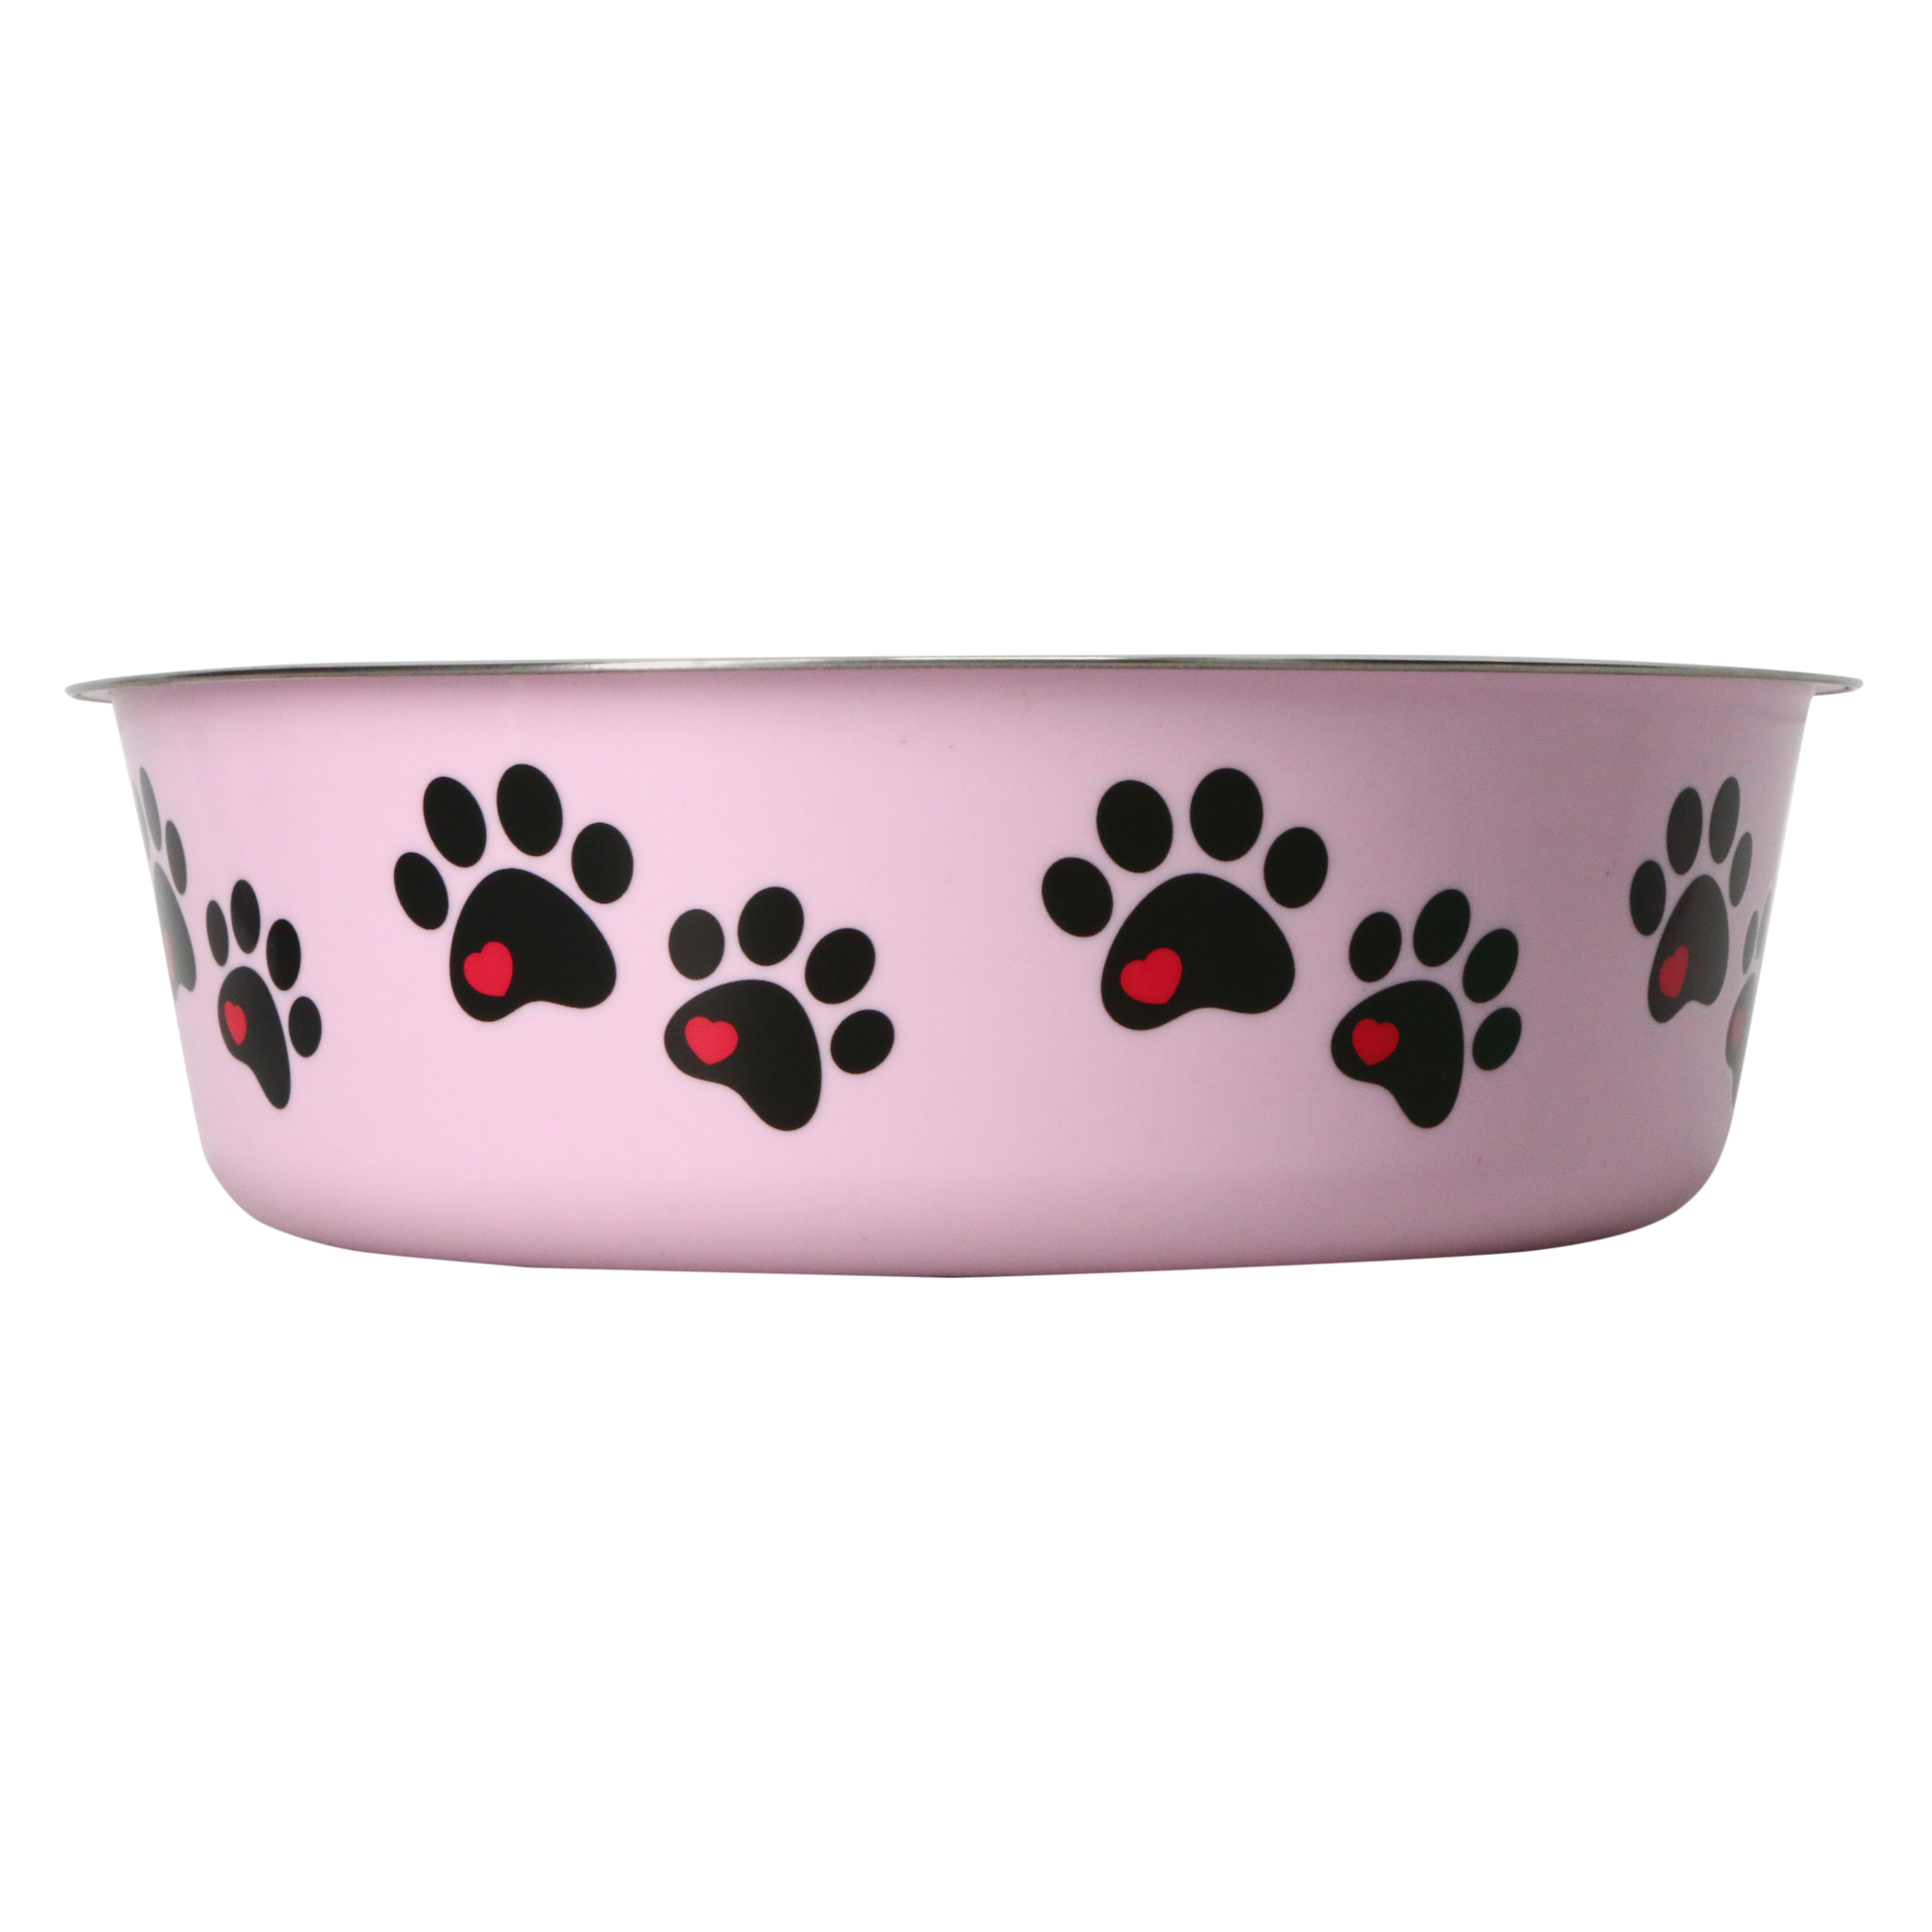 lilac stainless steel pet bowl for large dogs 6.5 cups/52oz